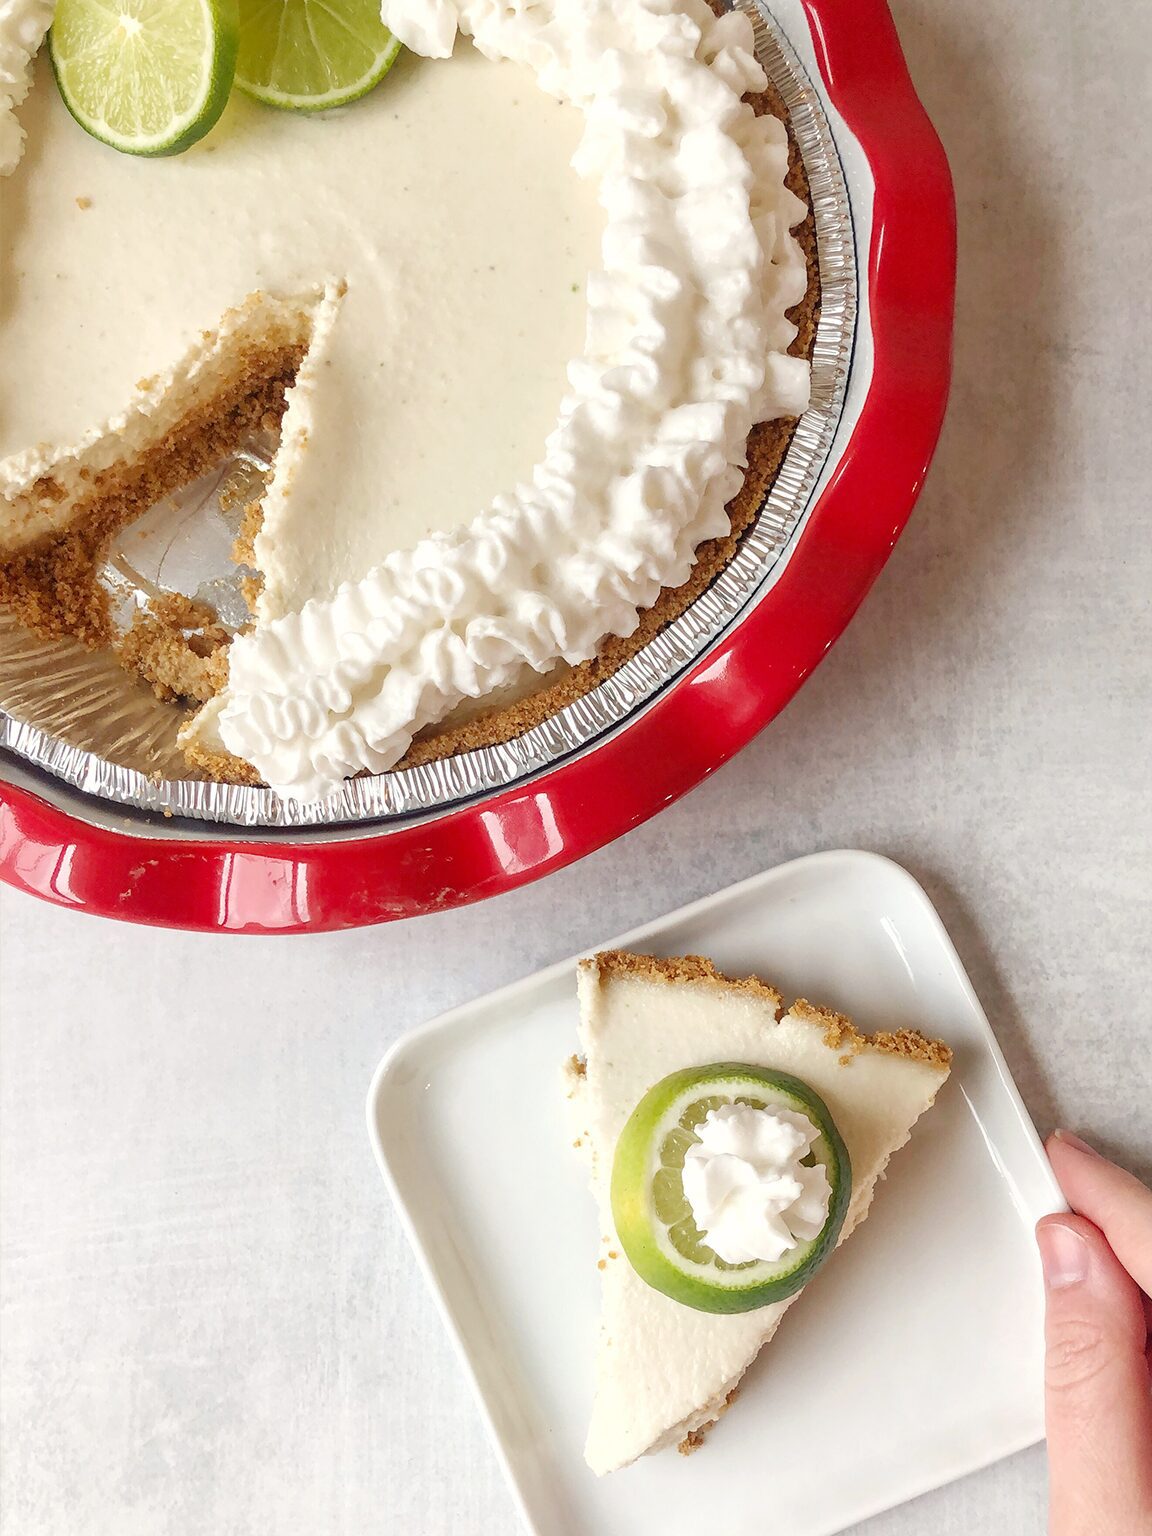 Slice-of-Homemade-Key-Lime-Pie-with-Whipped-Cream